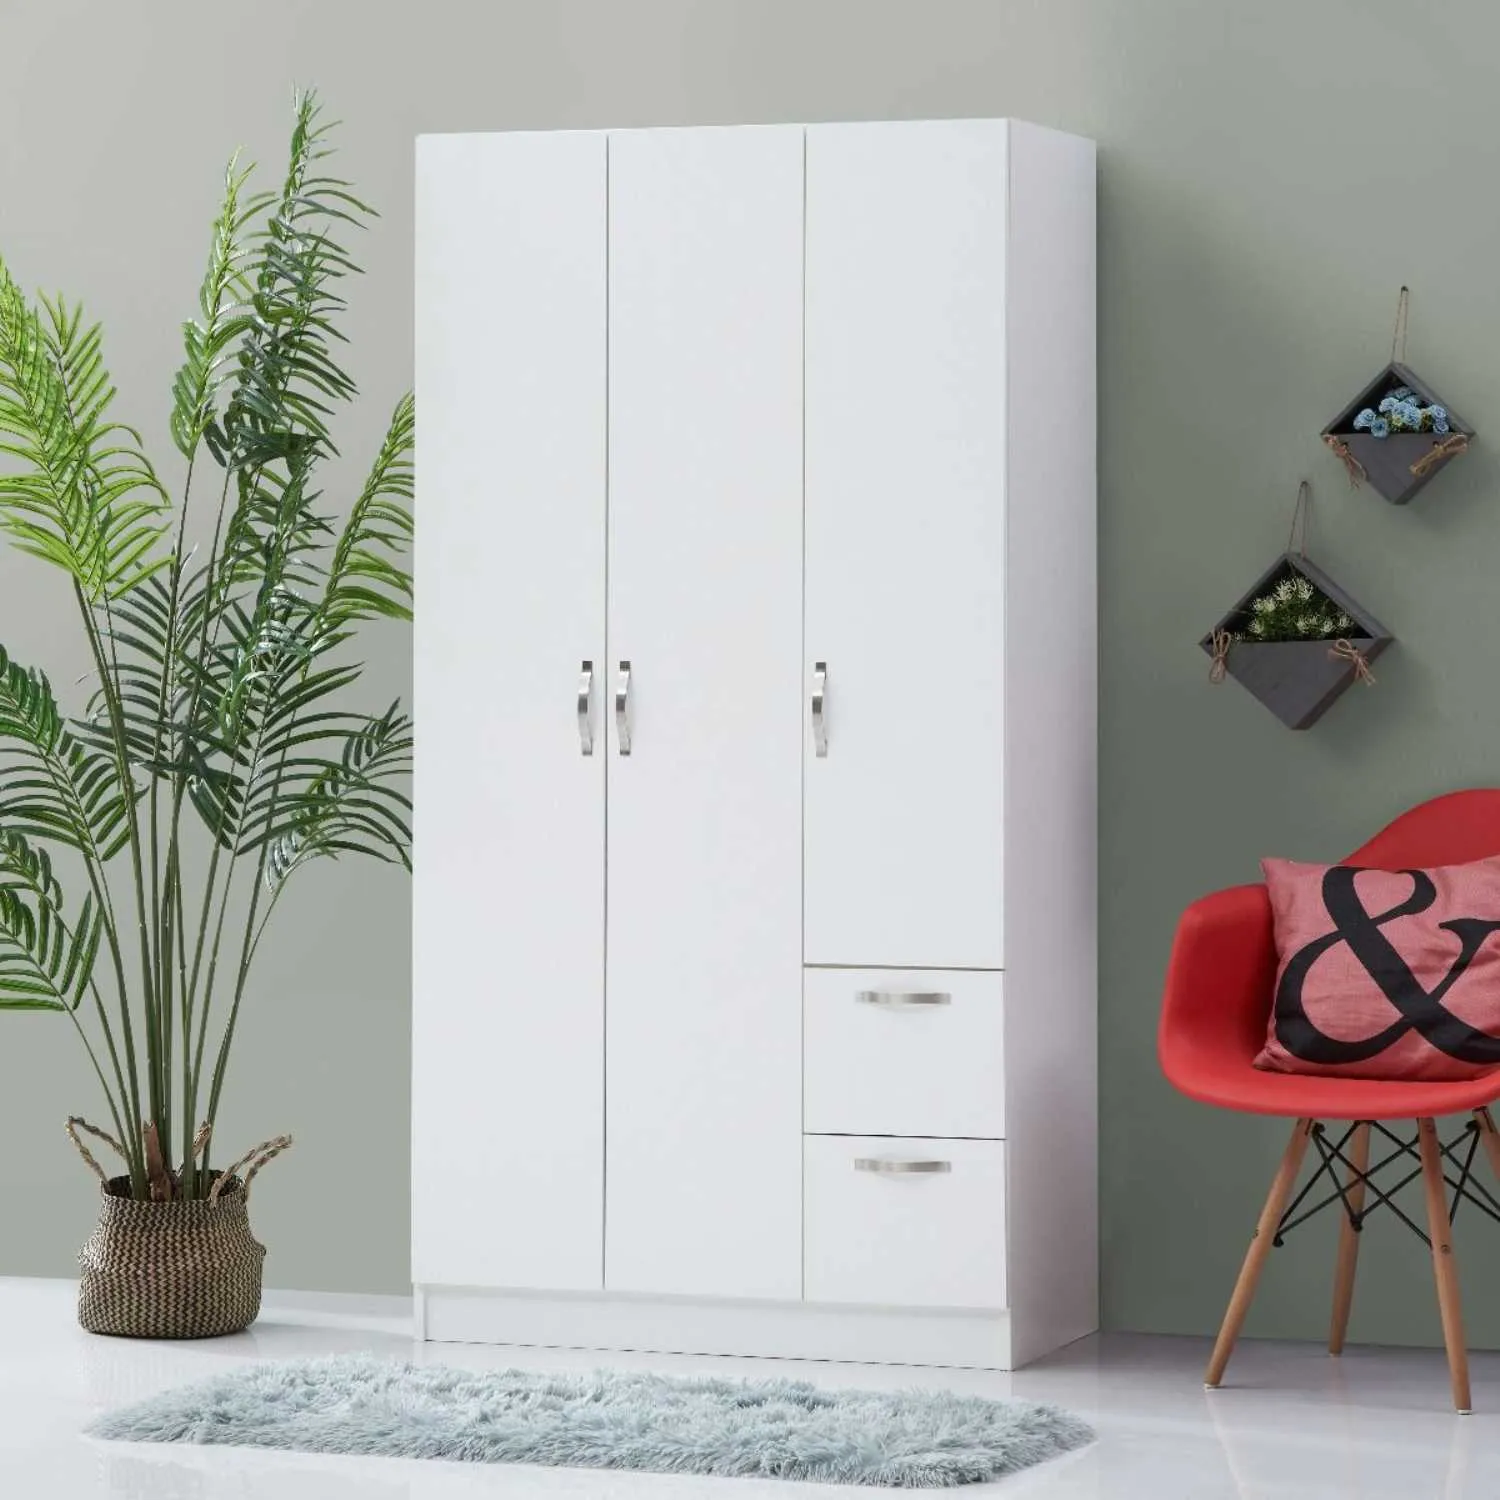 Modern 3 Door Triple Wardrobe with 2 Drawers in White Finish 180cm Tall